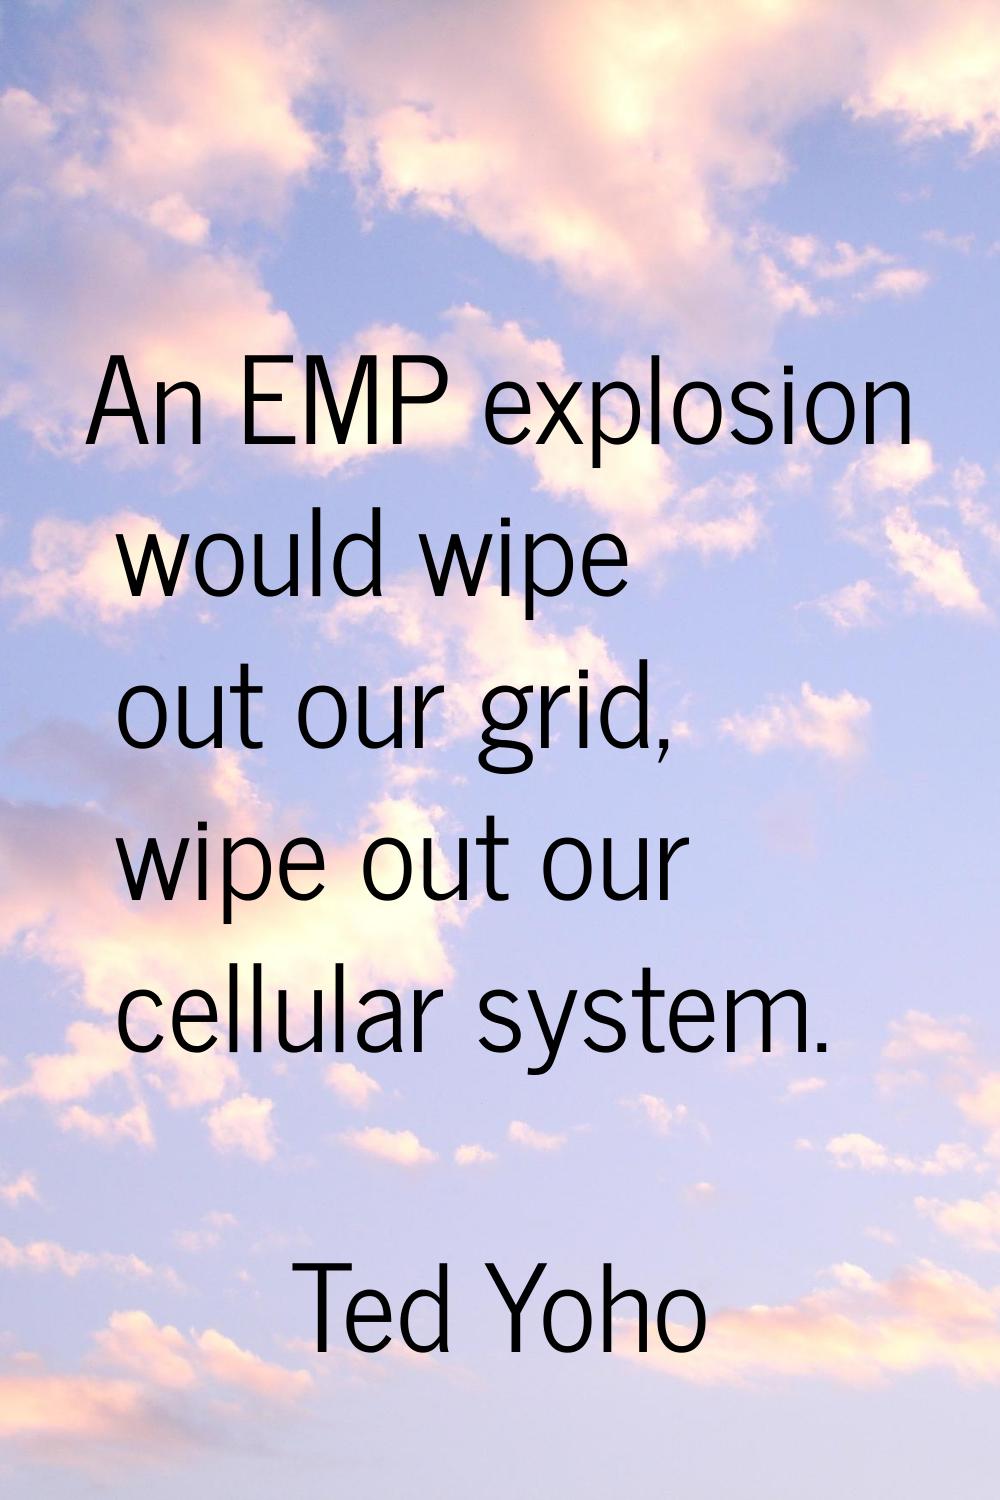 An EMP explosion would wipe out our grid, wipe out our cellular system.